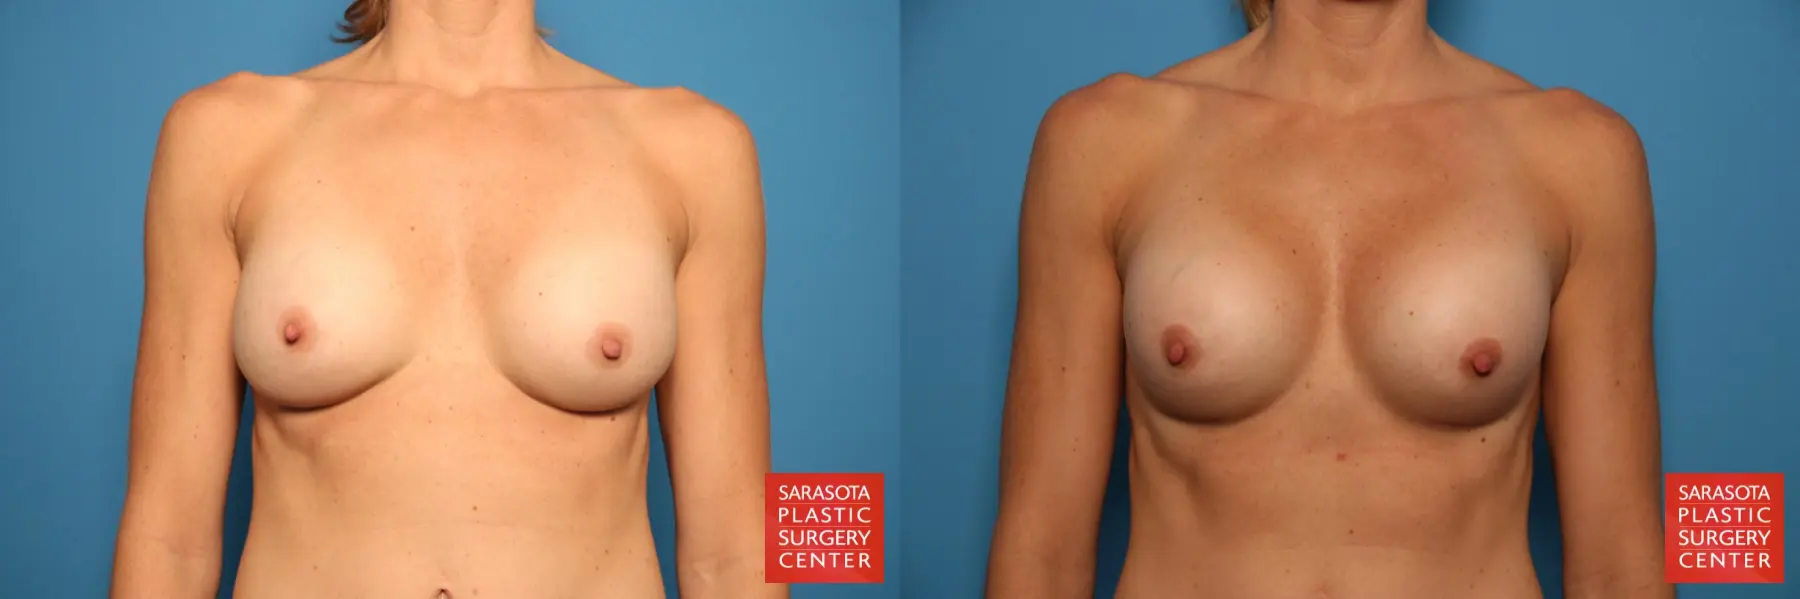 Breast Implant Removal/Replacement W/Mesh: Patient 2 - Before and After  